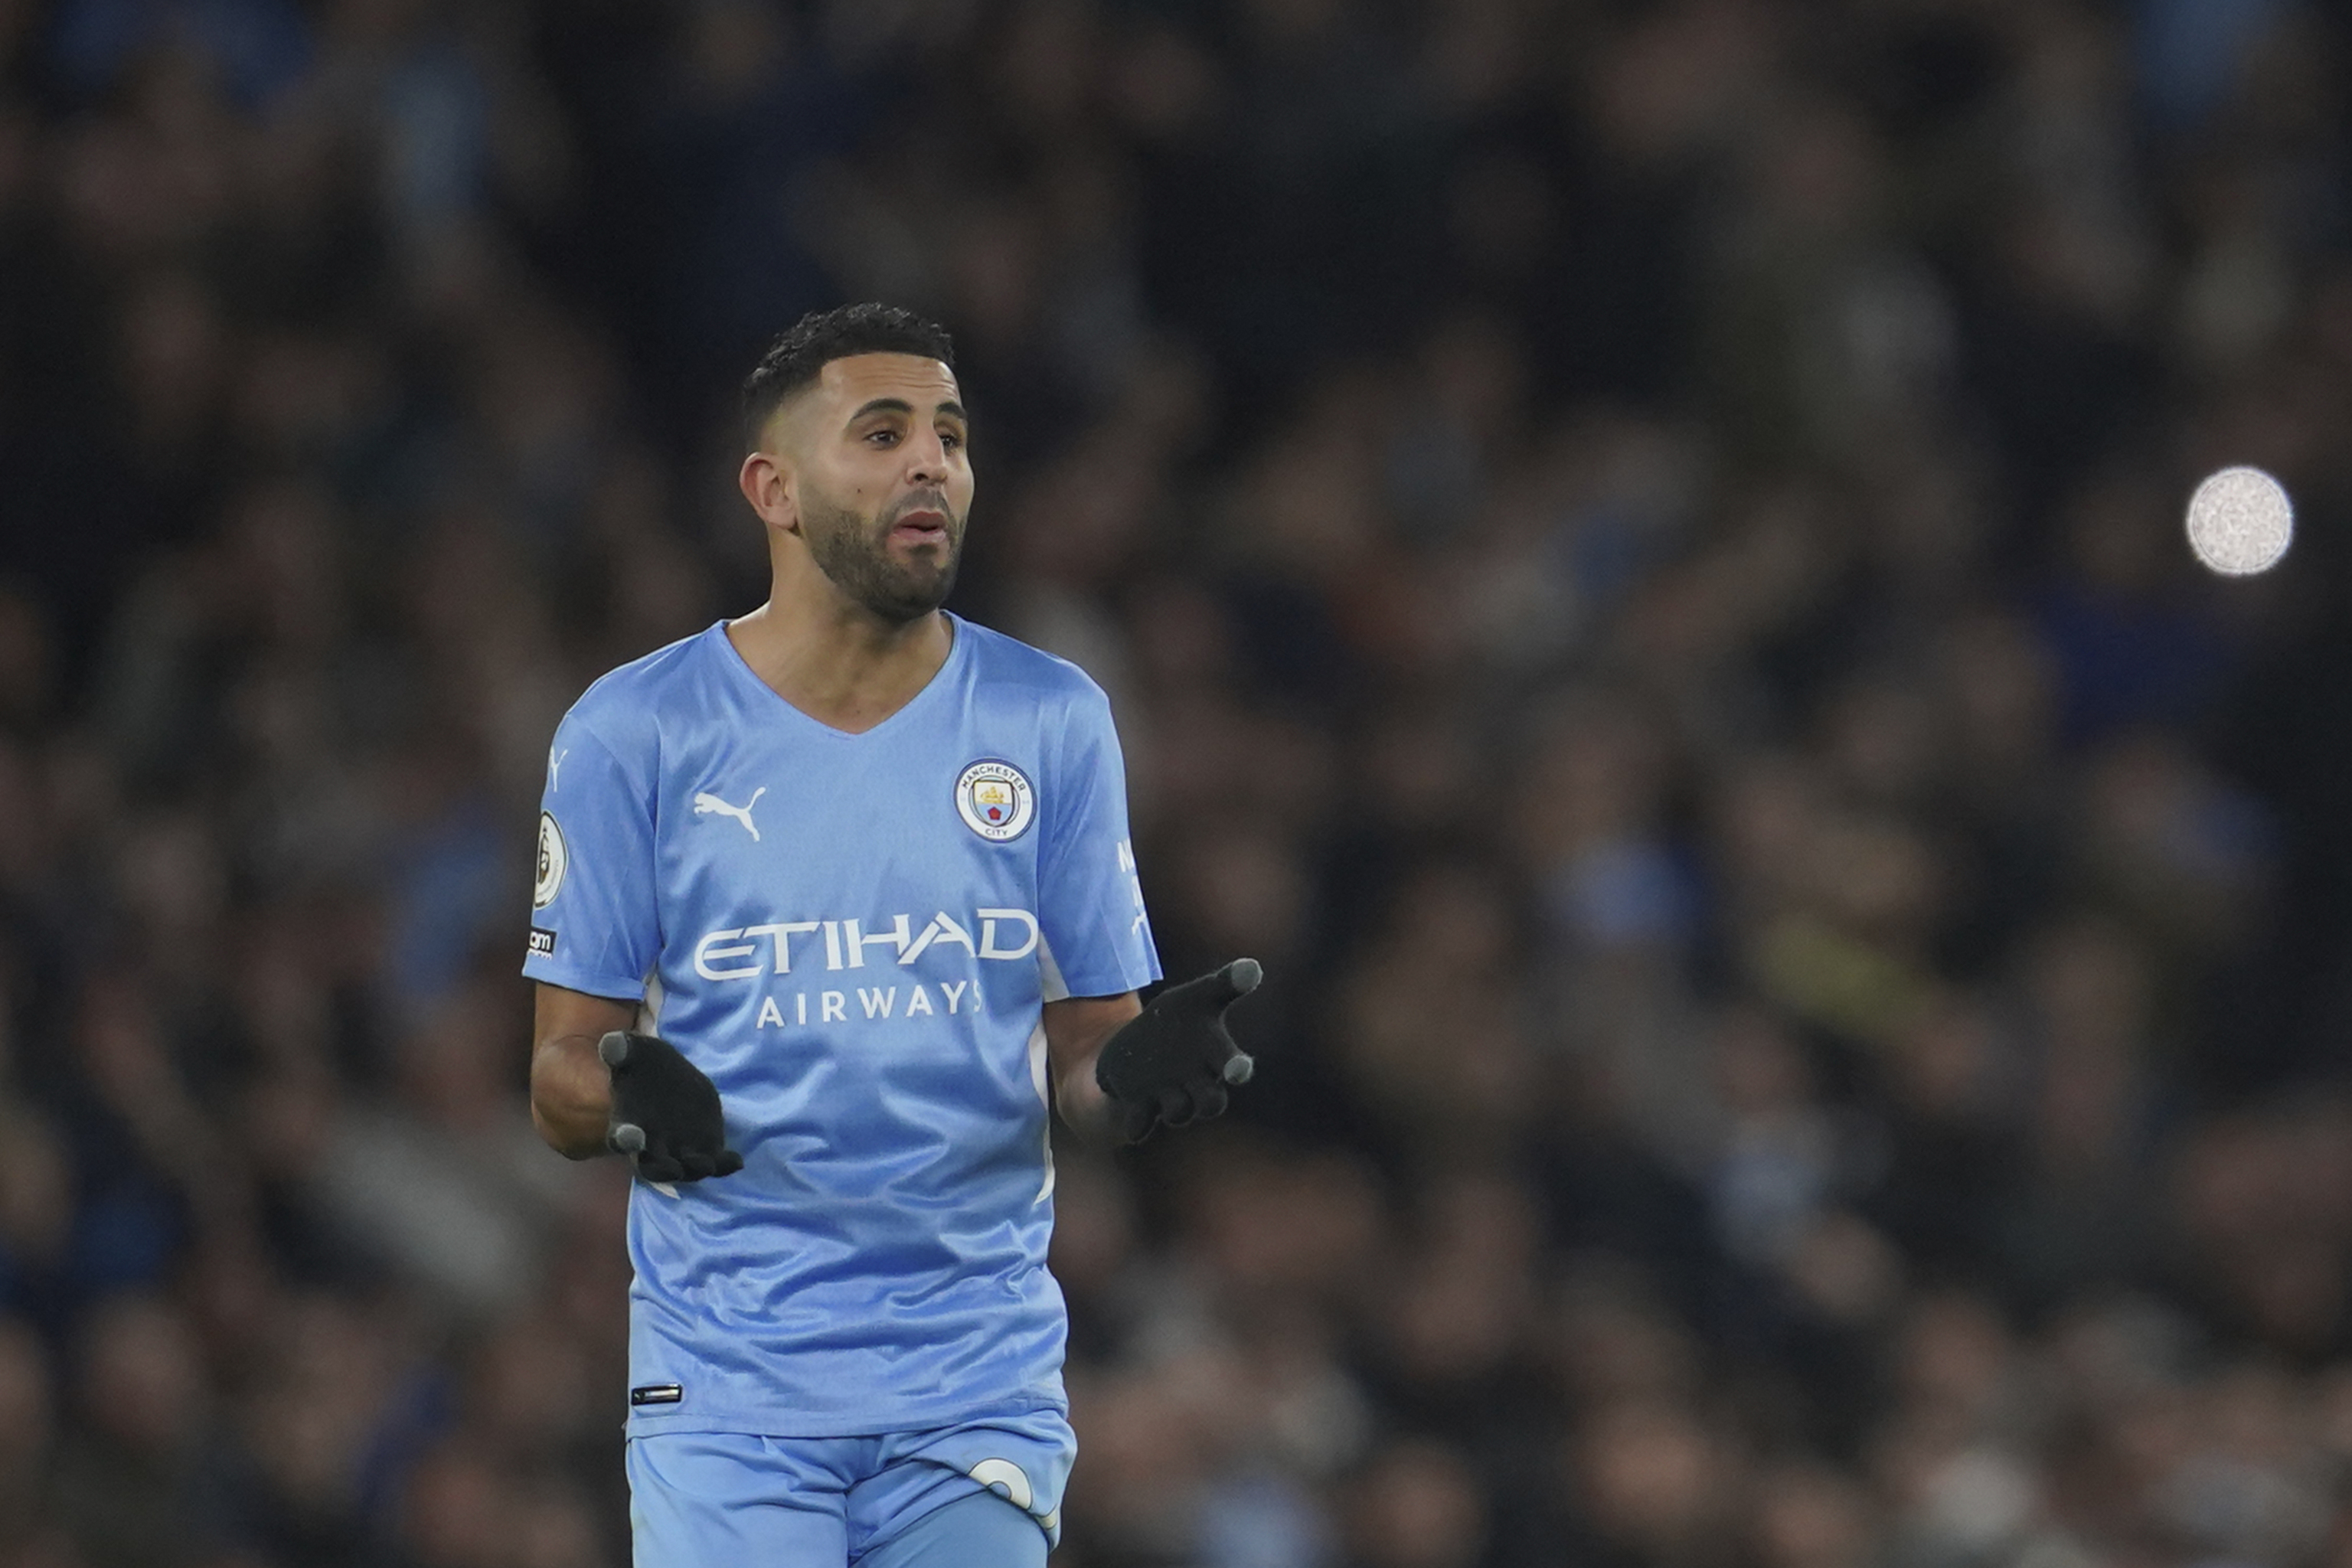 Manchester City's Riyad  lt;HIT gt;Mahrez lt;/HIT gt; gestures during the English Premier League soccer match between Manchester City and Manchester United, at the Etihad stadium in Manchester, England, Sunday, March 6, 2022. (AP Photo/Jon Super)